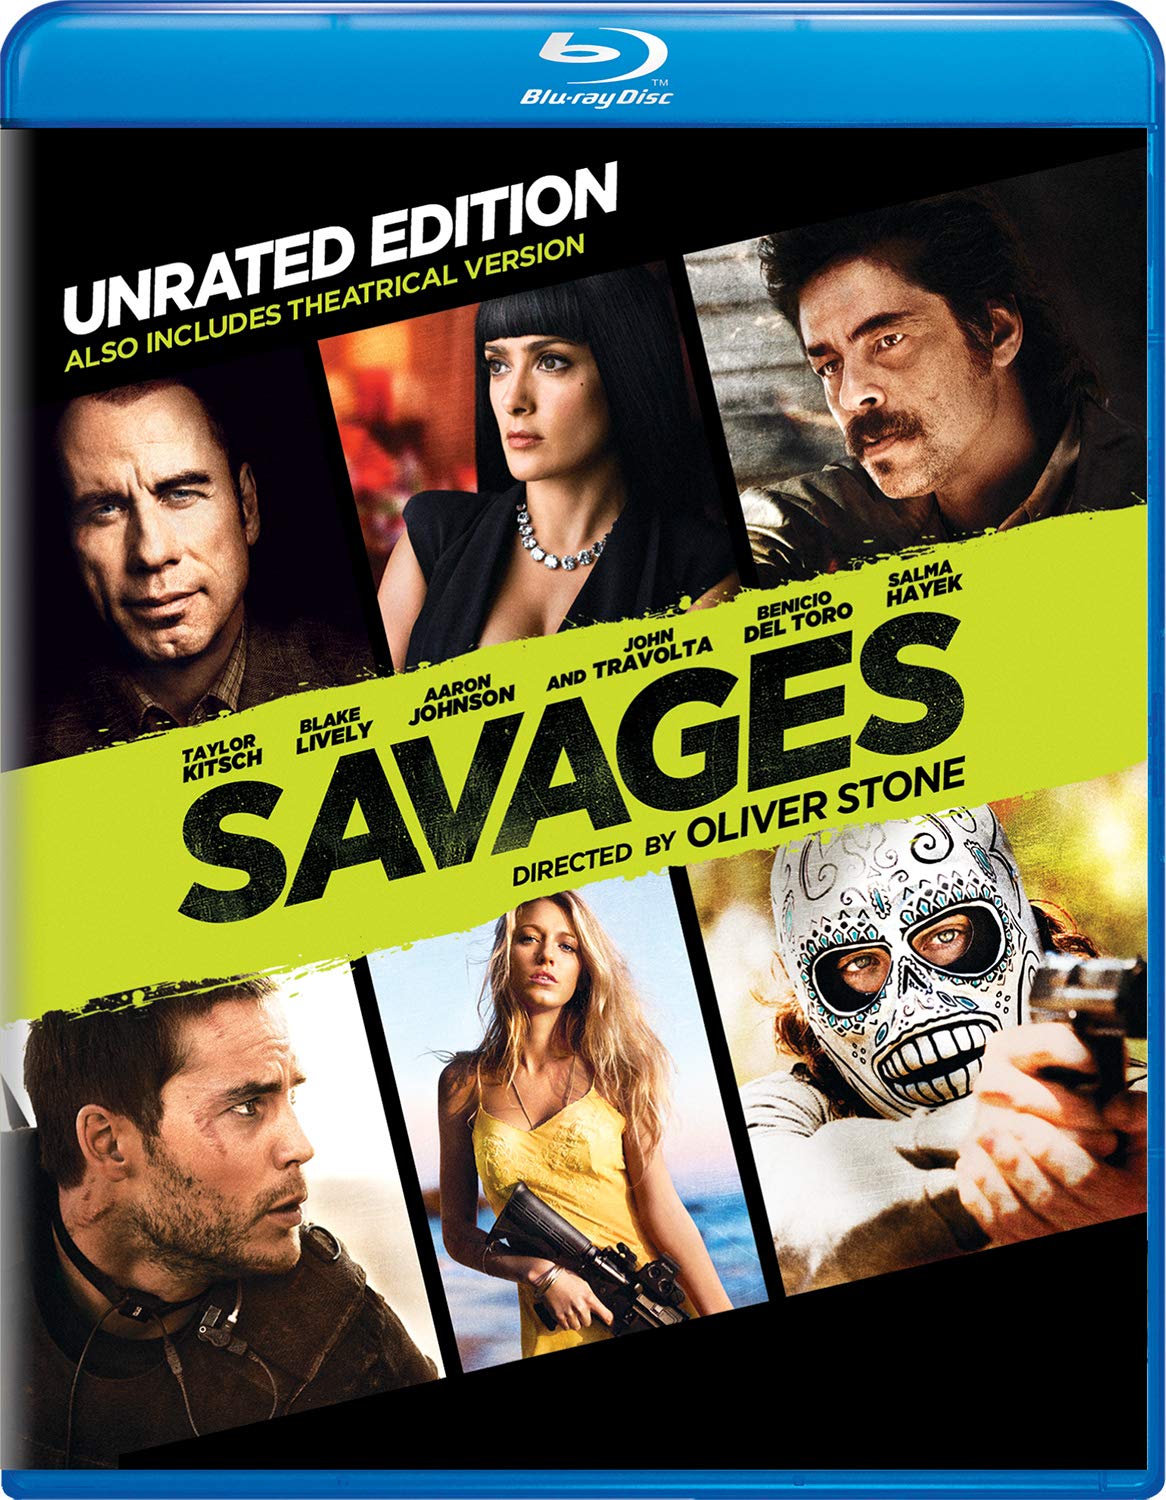 Savages (Unrated) (Blu-ray), Universal Studios, Action & Adventure